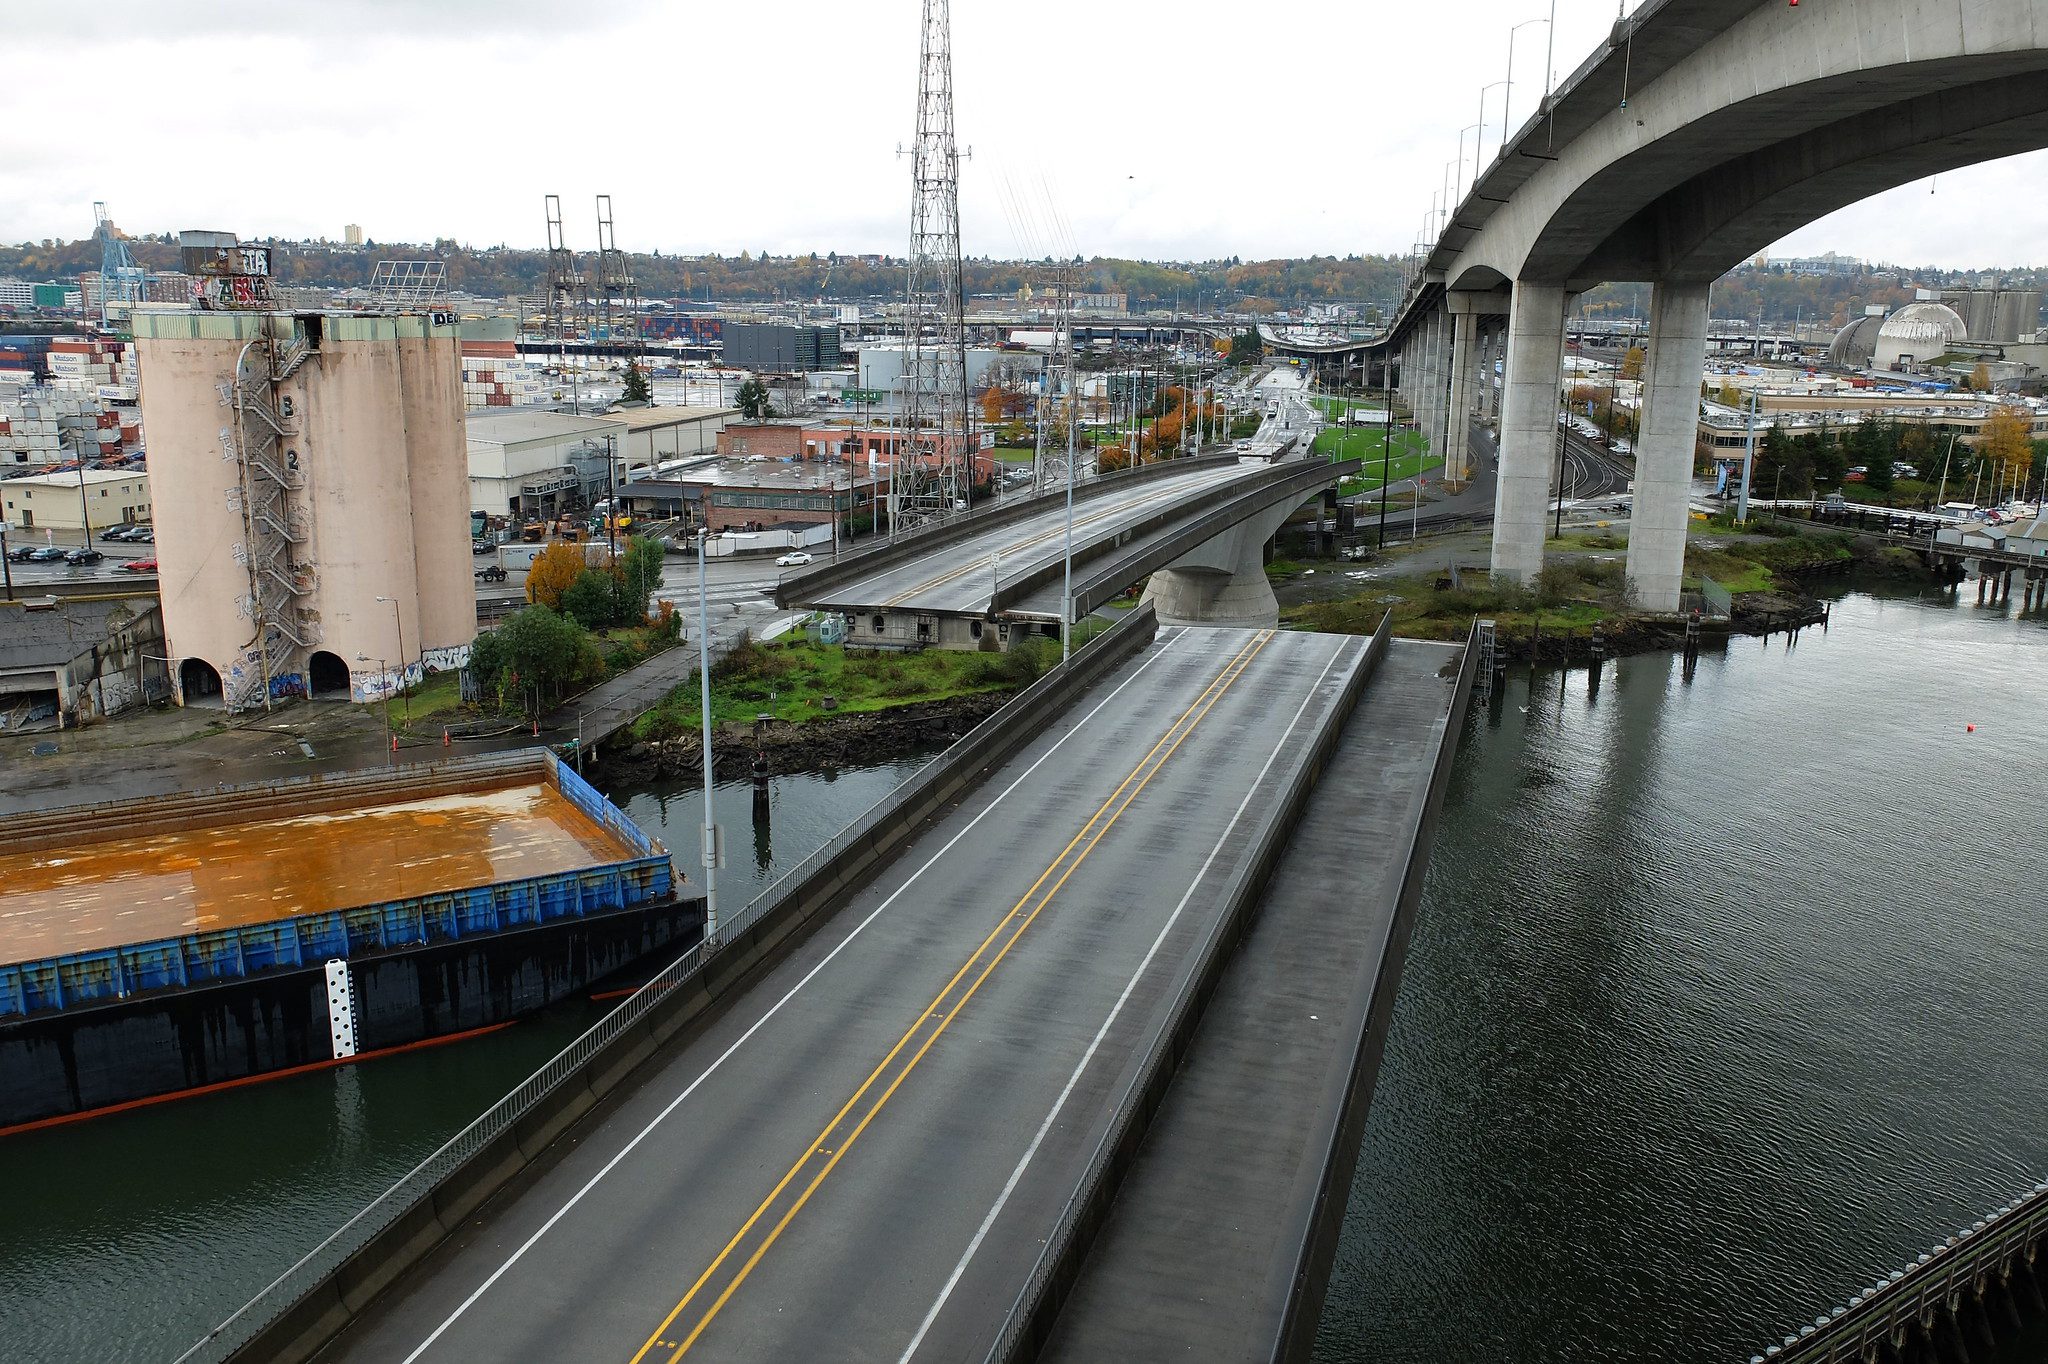 Previous photo of the Spokane St Swing Bridge across the Duwamish Waterway. The West Seattle High-Rise Bridge is in the upper-right corner, with various buildings in the upper left corner. A barge is in the lower left corner.